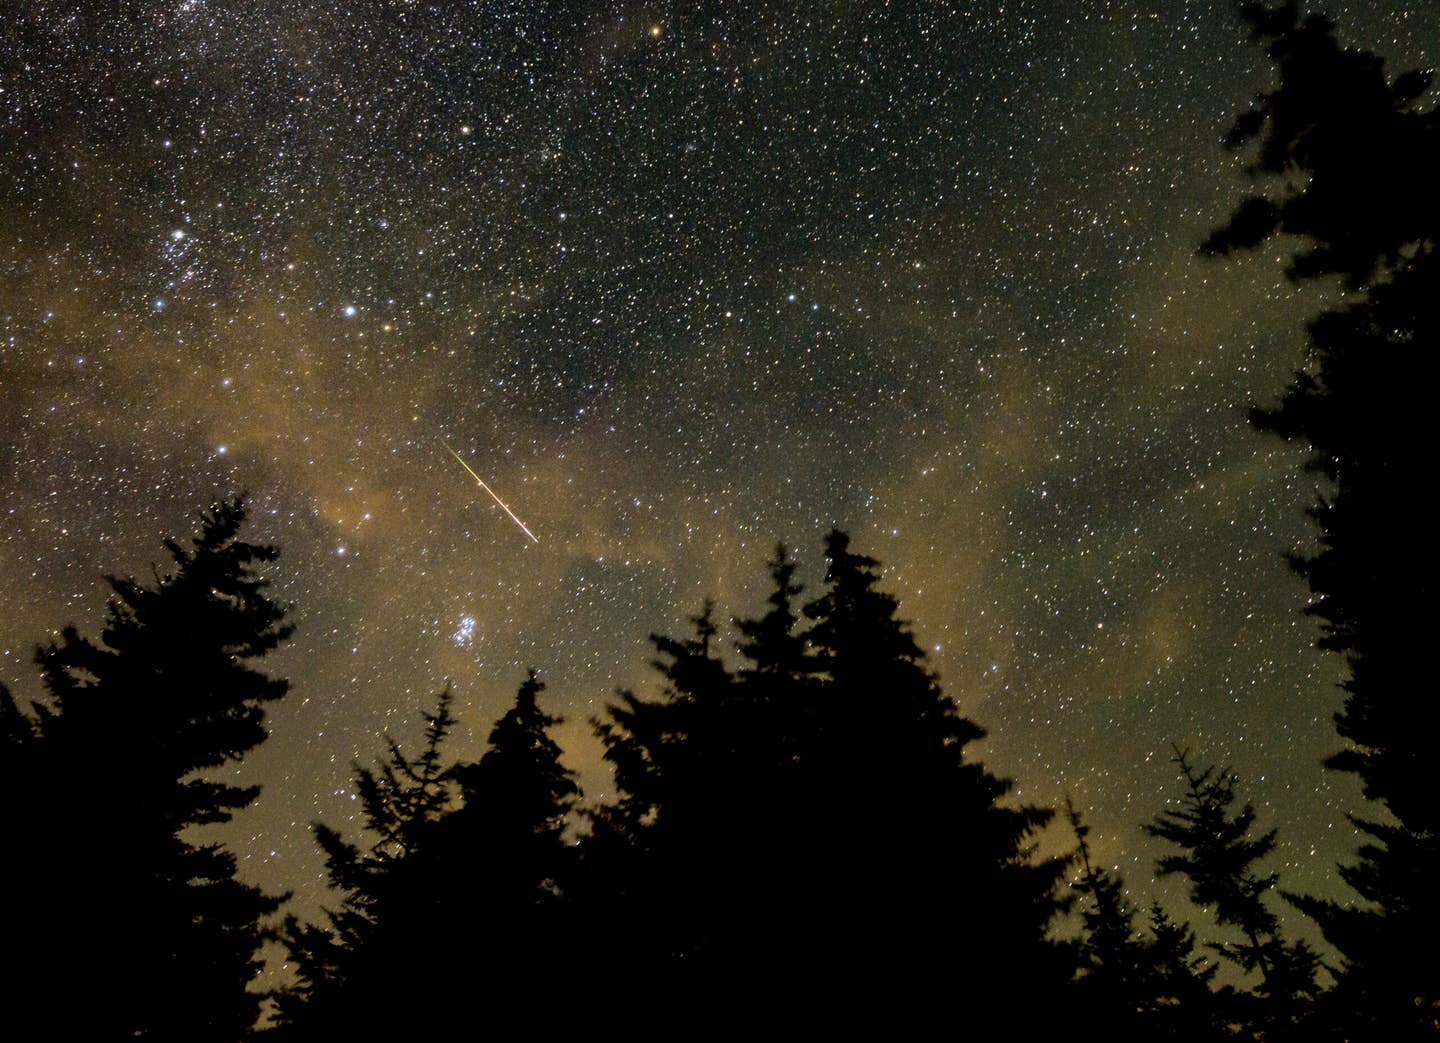 A meteor streaks across the sky during the annual Perseid meteor shower. <em>Credit: Bill Ingalls/NASA</em>